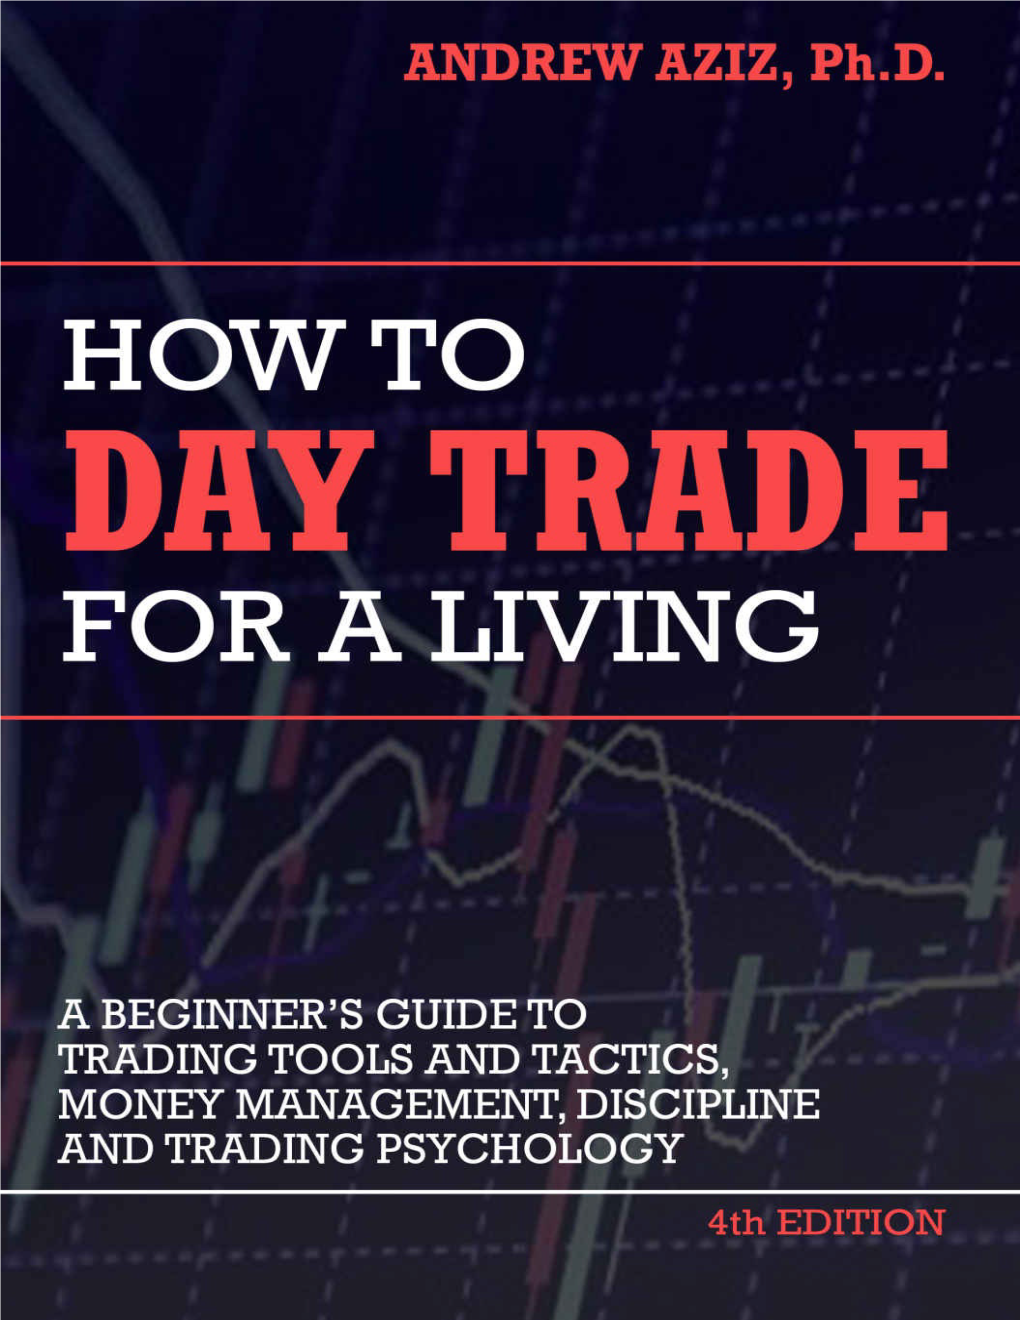 D Day Trading Be Any Different?